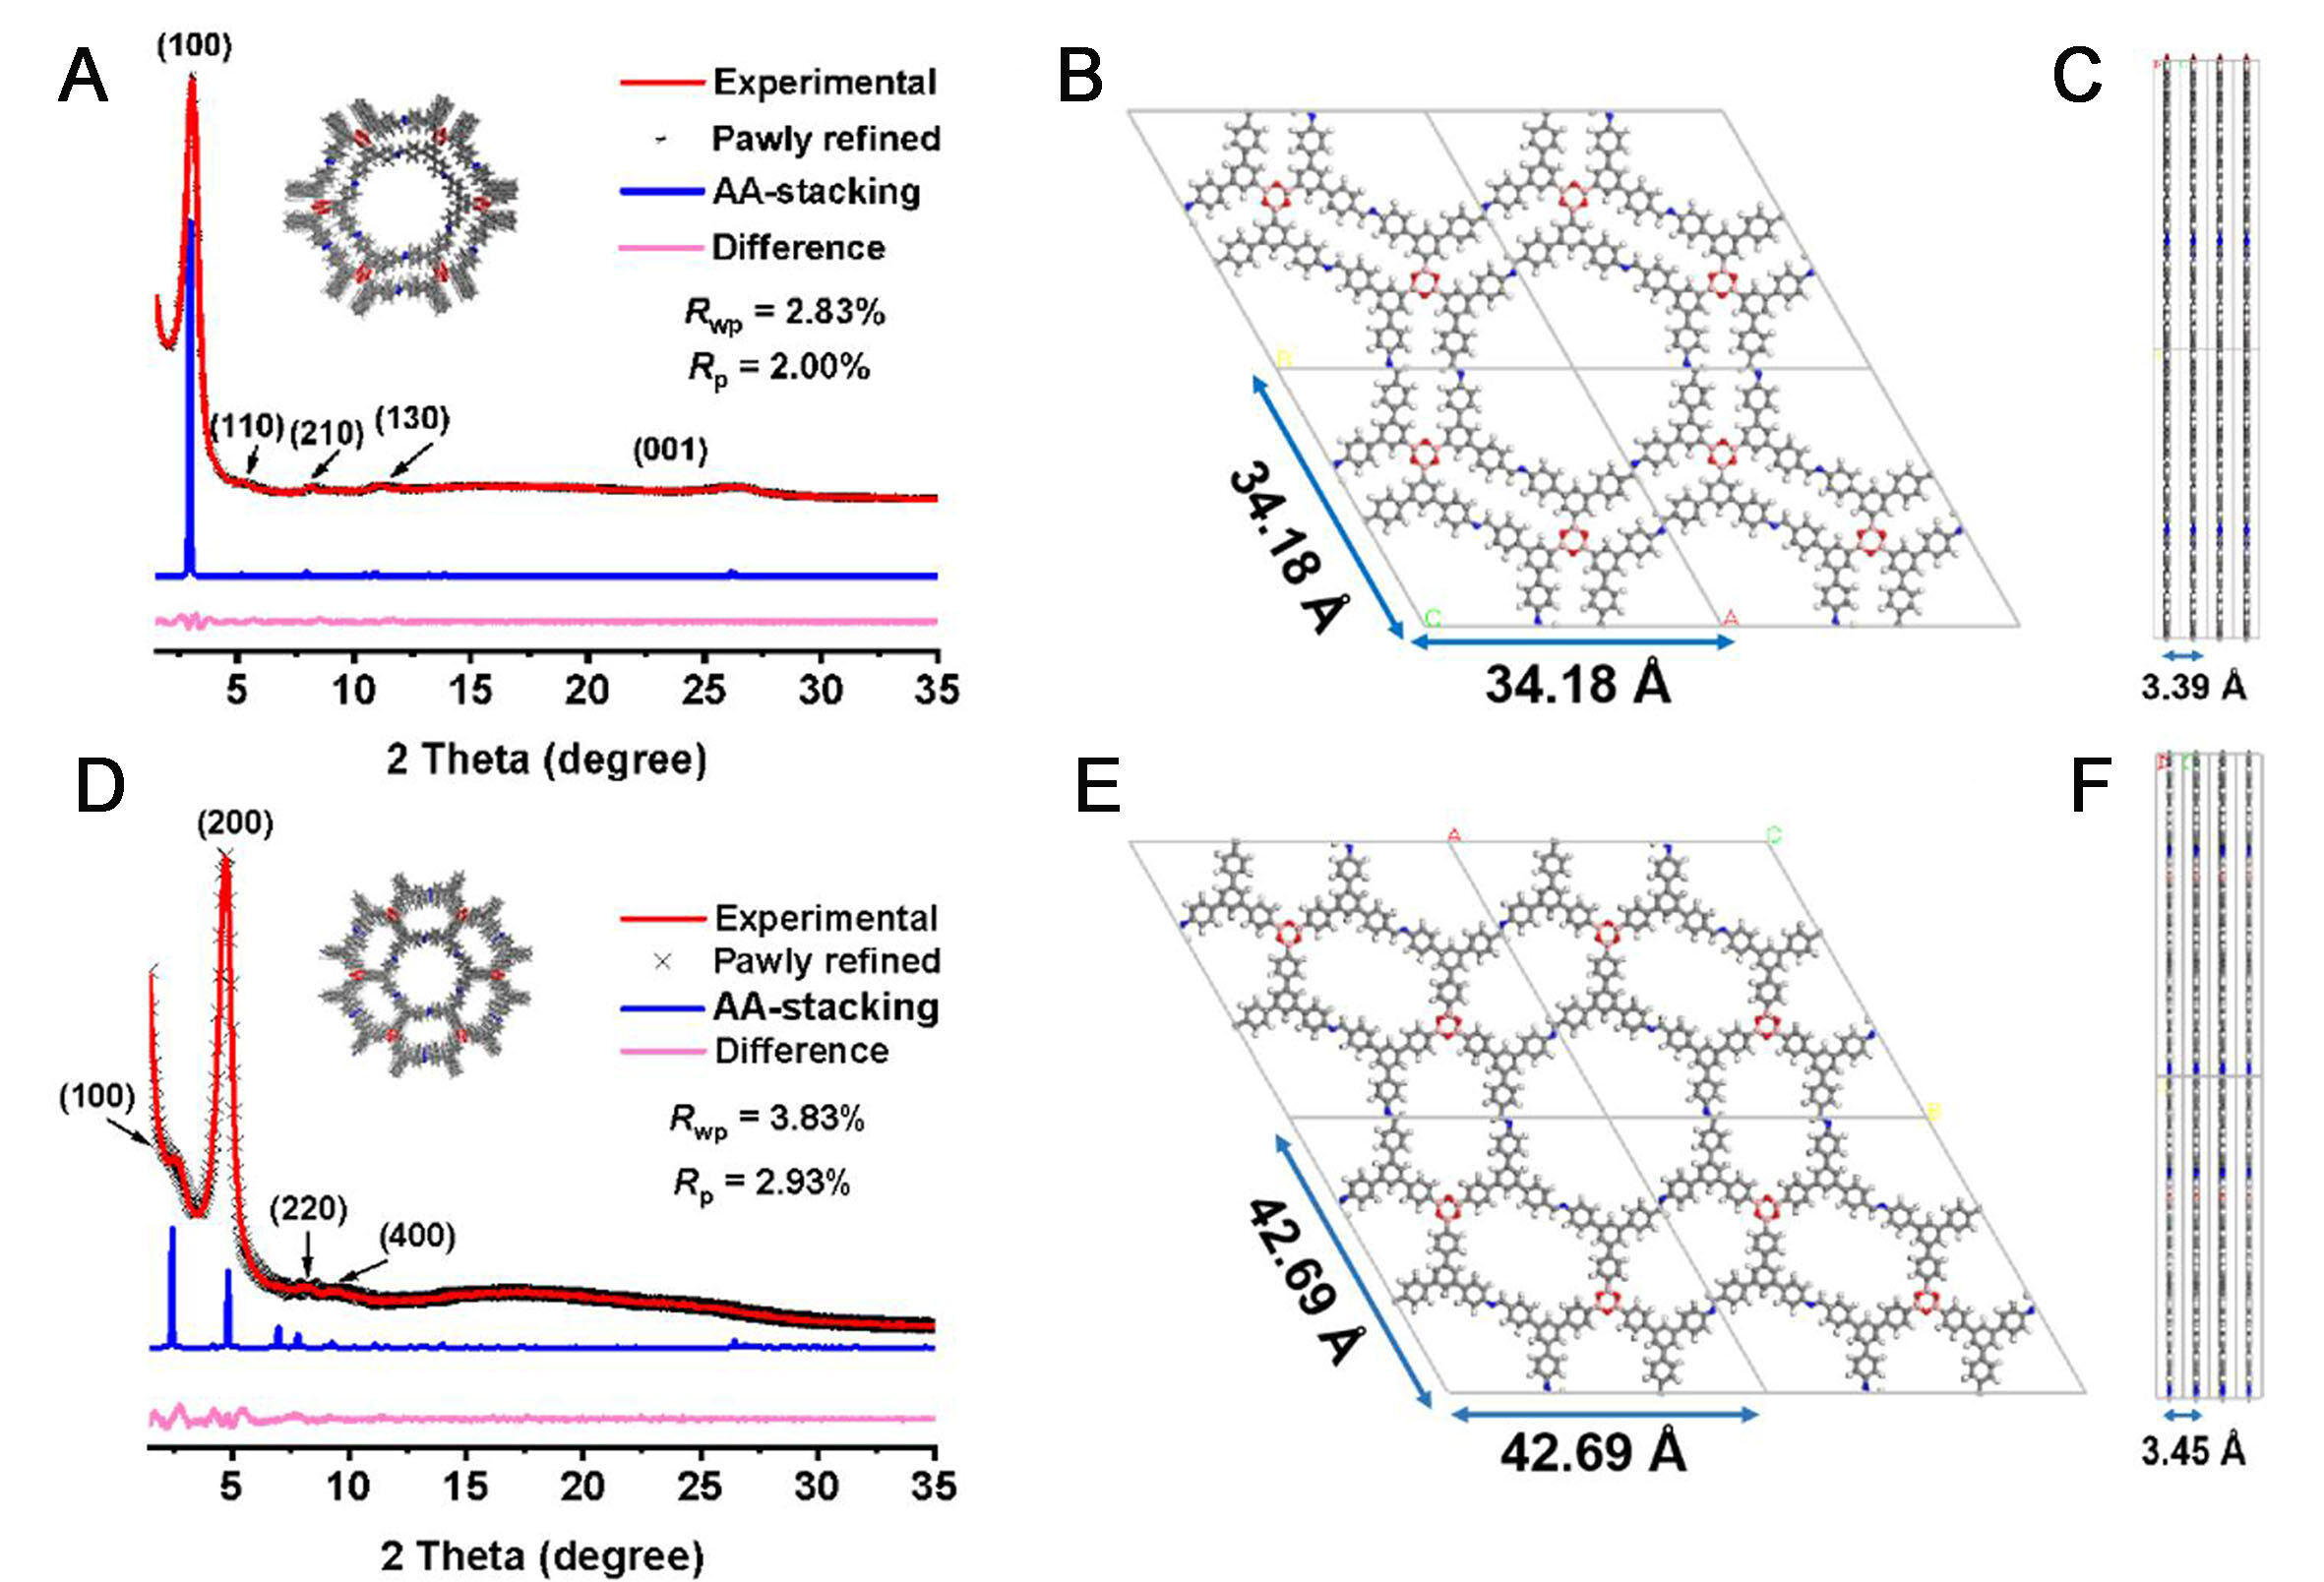 Facile synthesis of heteroporous covalent organic frameworks with dual linkages: a “three-in-one” strategy